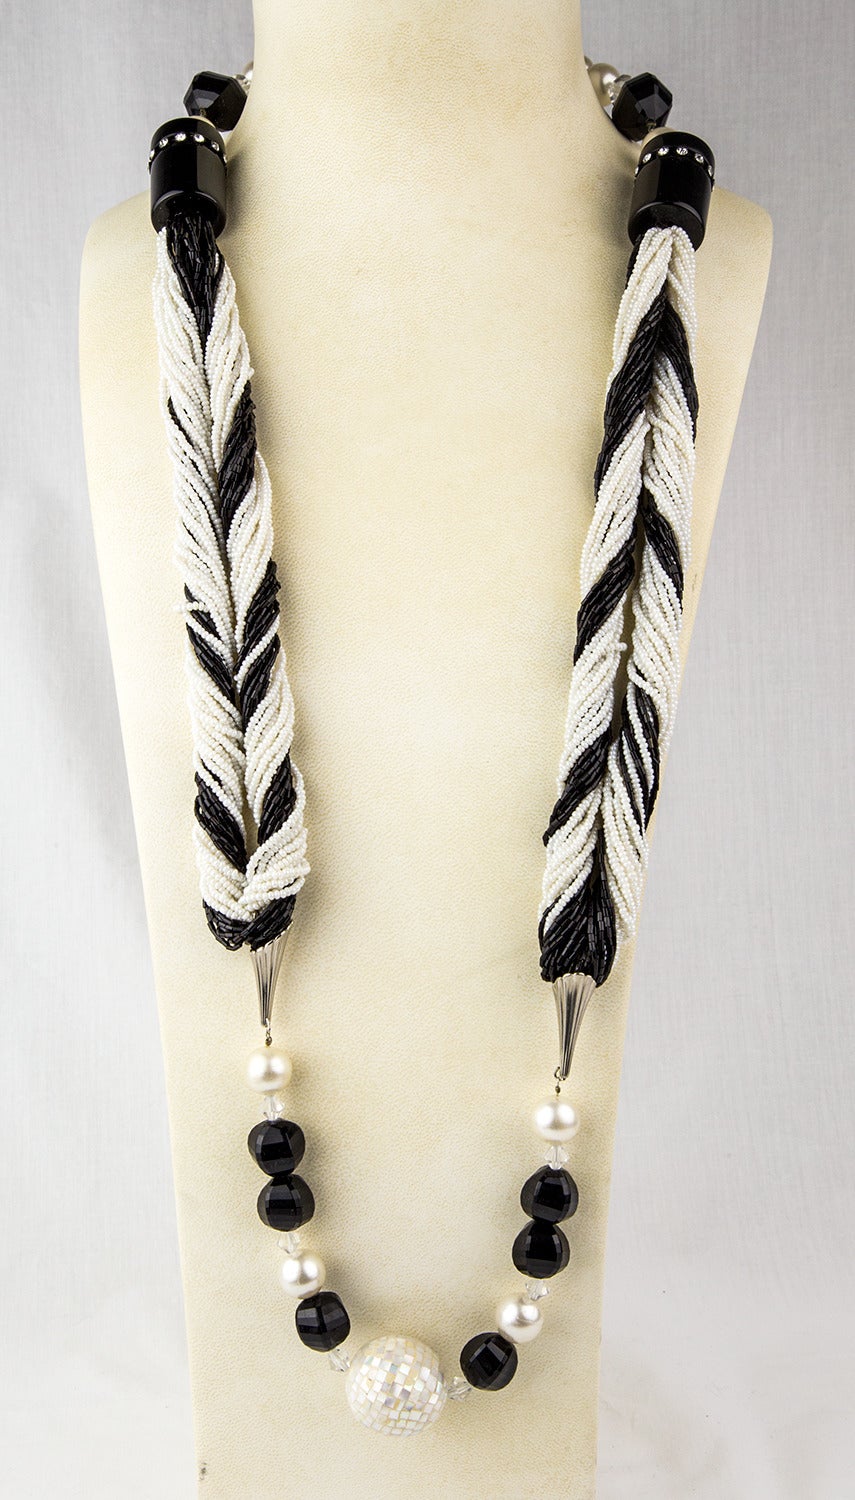 Stand-out Black and White Necklace featuring a combination of Celluloid Beads, Seed Beads, Tubular black beads embedded with a circle of rhinestones, a Disco Ball Bead, Faux Pearls, Crystal and Silver toned findings. Measuring approx. 38” long. Chic